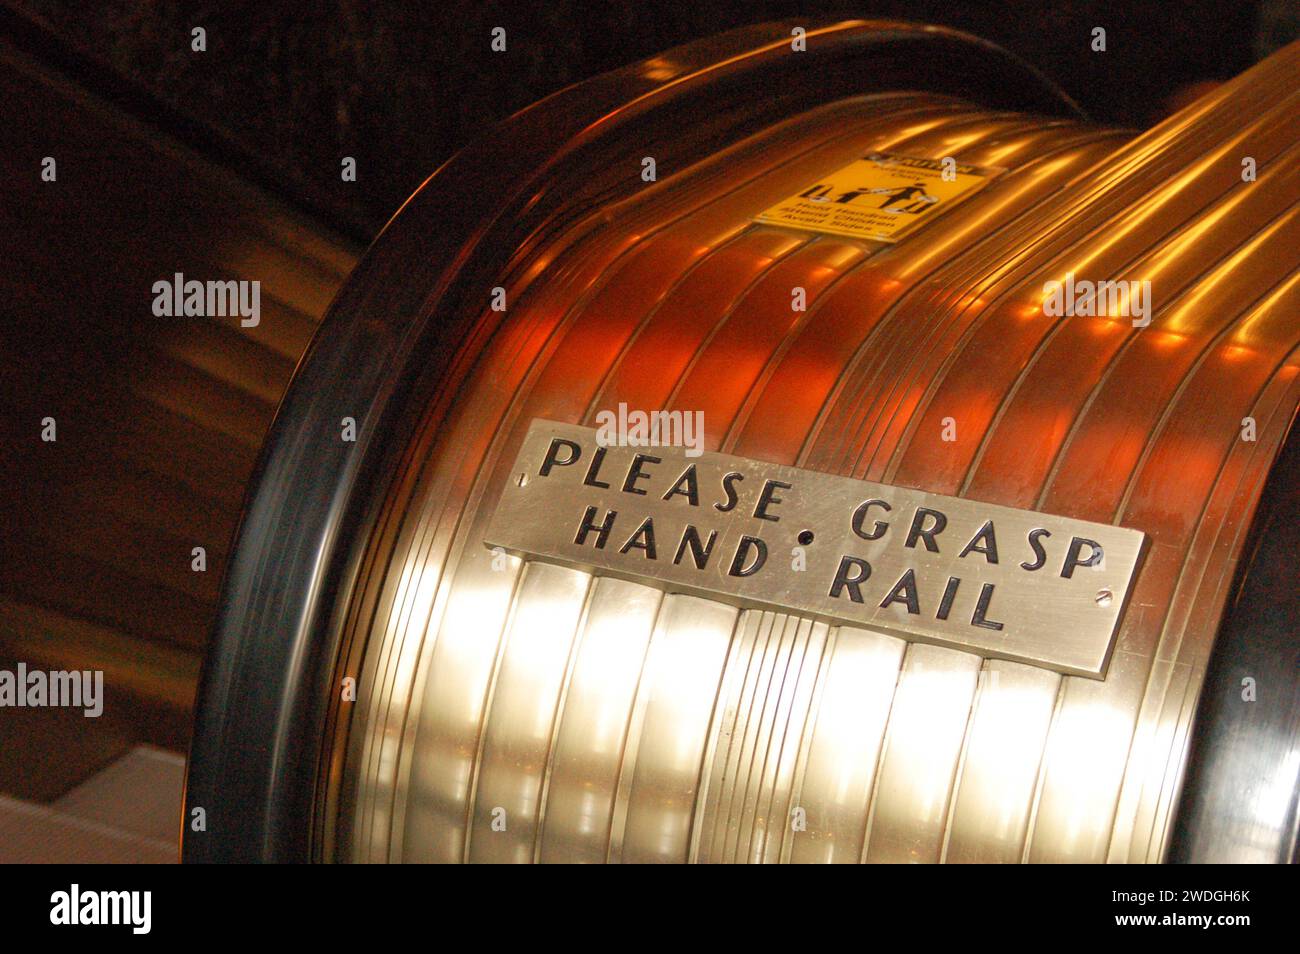 A sign on the escalators, in a vintage art deco style,  in a New York City building requests guests to grab the hand r Stock Photo